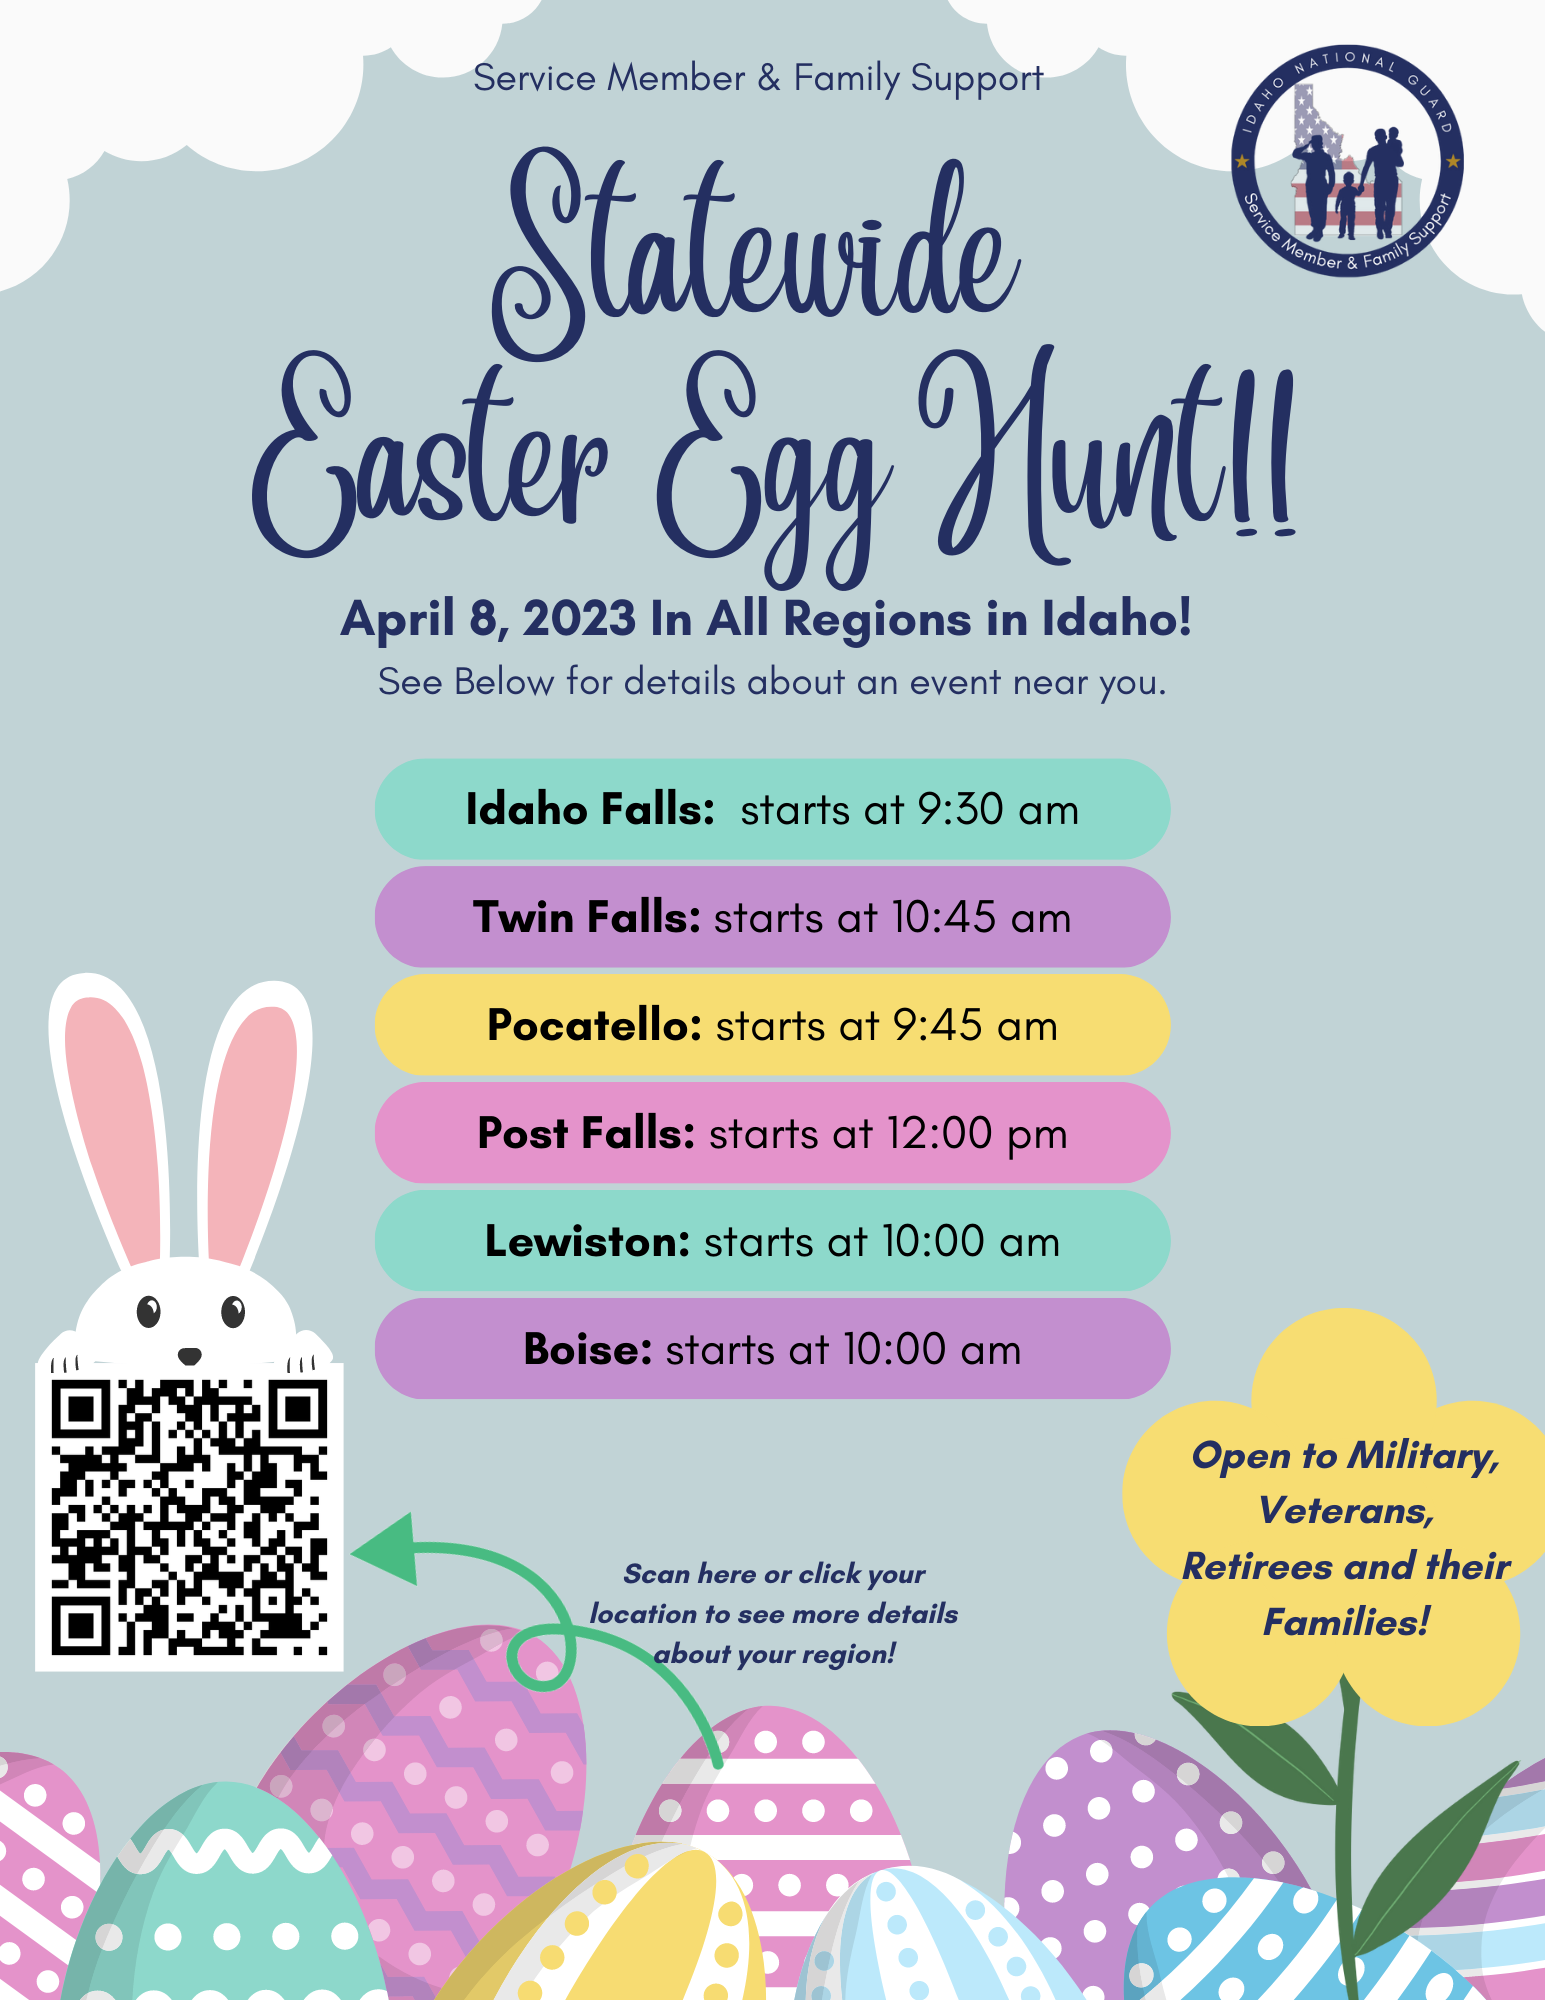 Statewide Easter Egg Hunts | Military Division